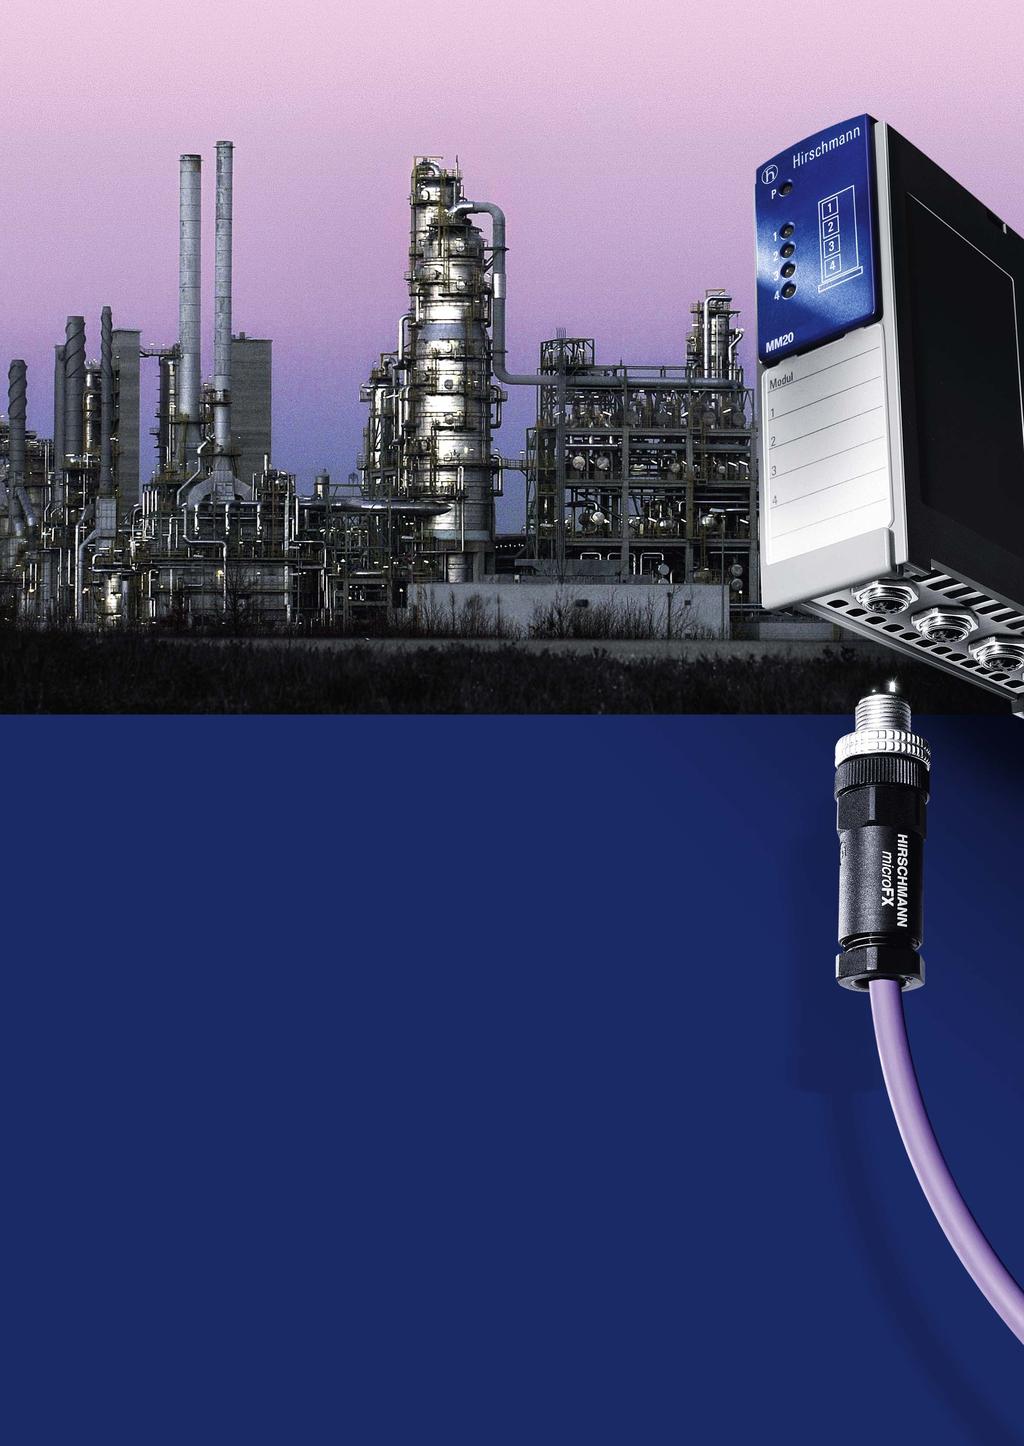 WELCOME TO ATEX ZONE 1: Industrial Ethernet from Hirschmann.